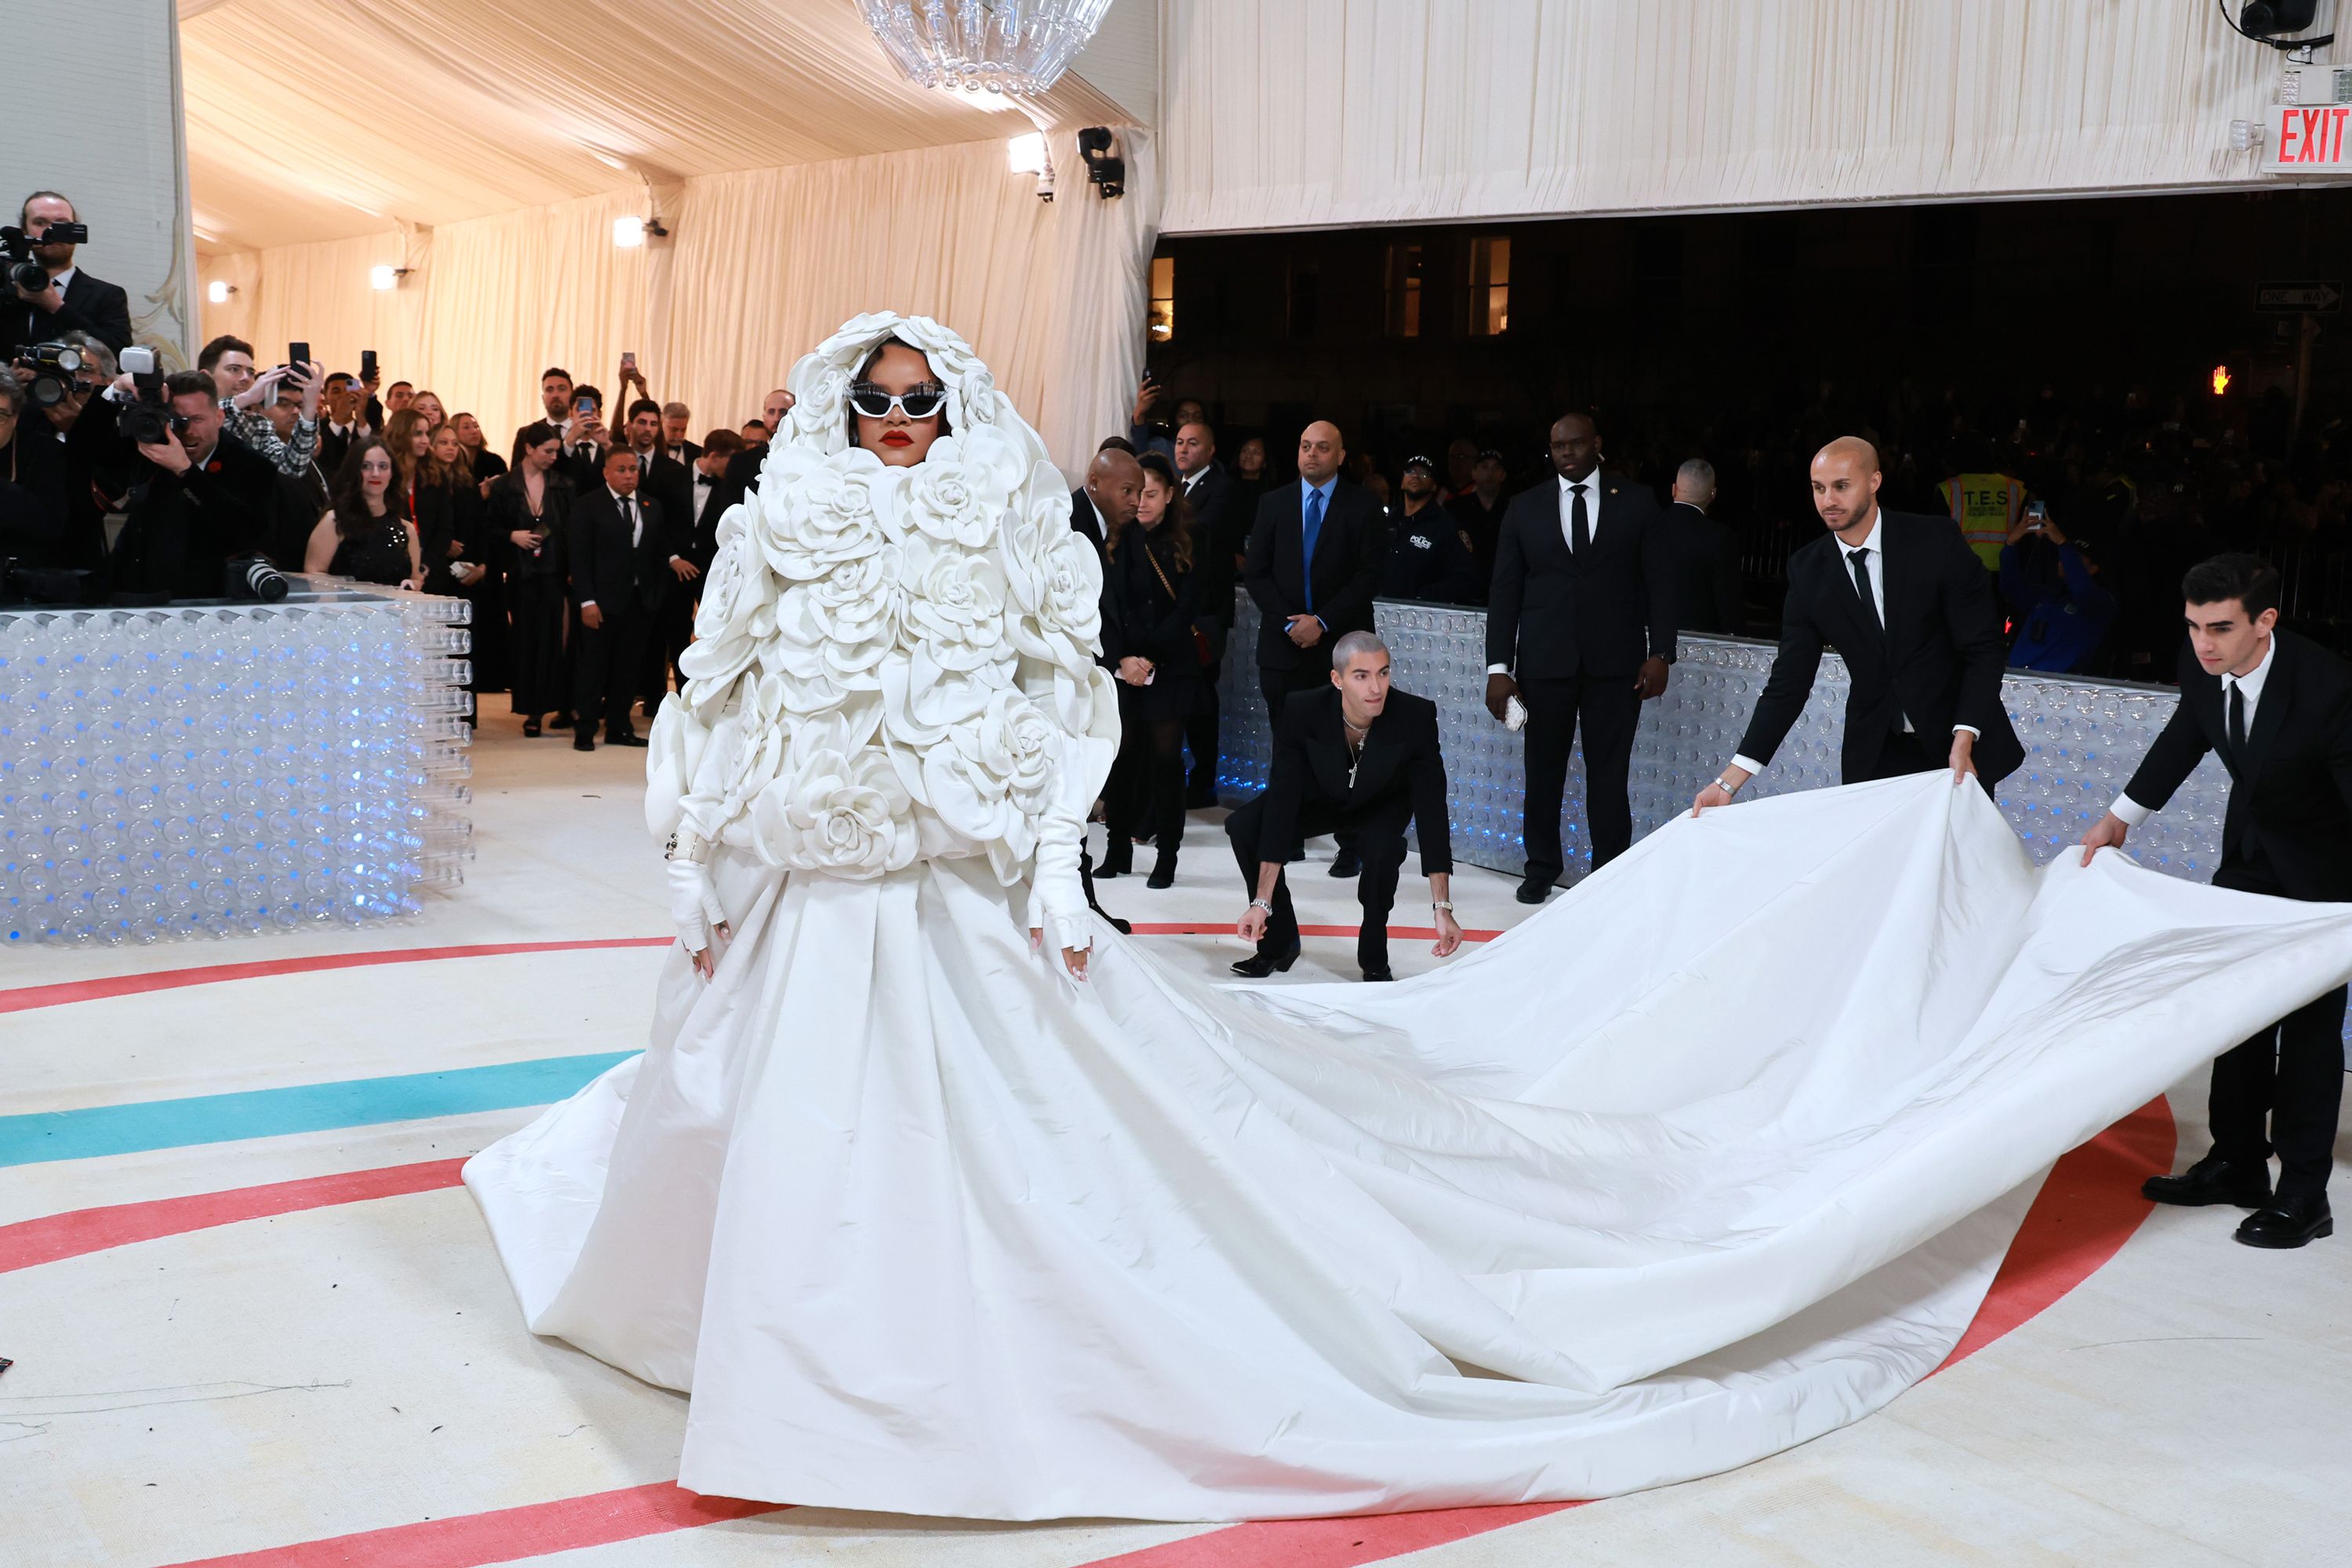 Rihanna puts her own spin on the Chanel bride at the Met Gala